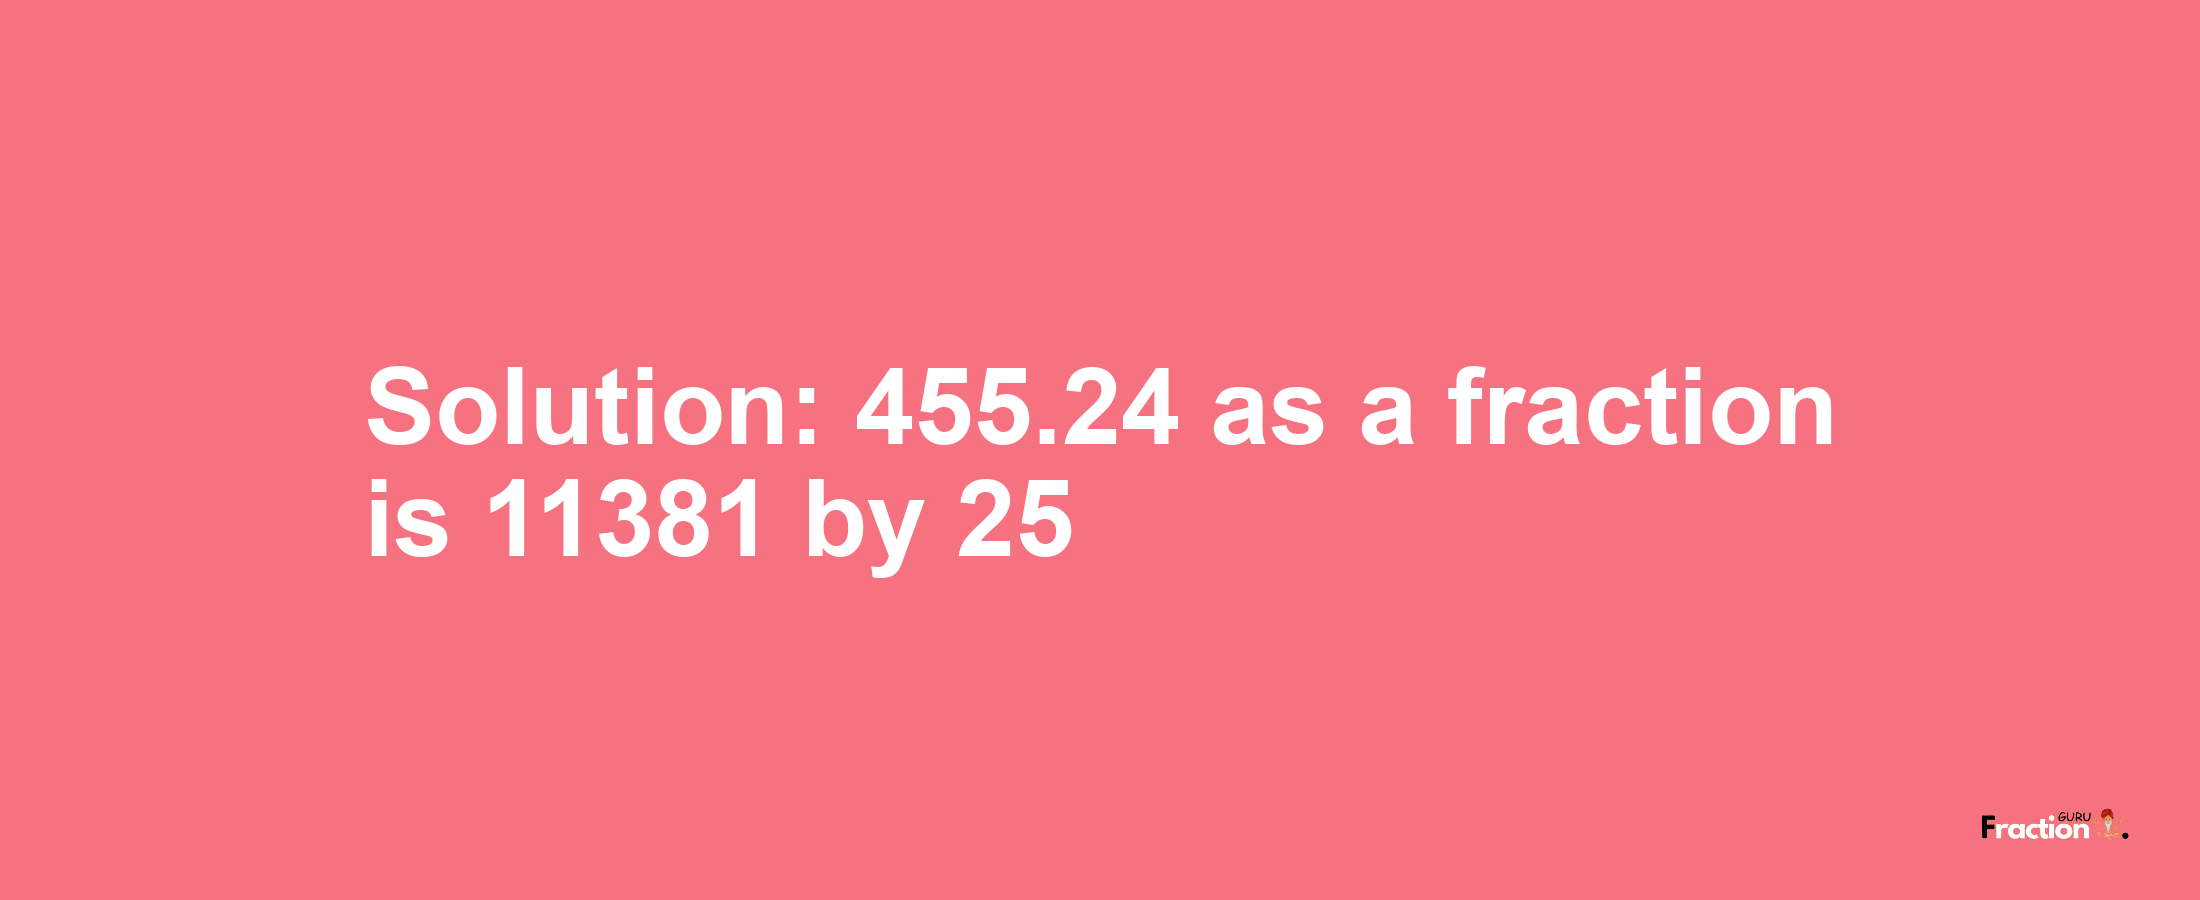 Solution:455.24 as a fraction is 11381/25